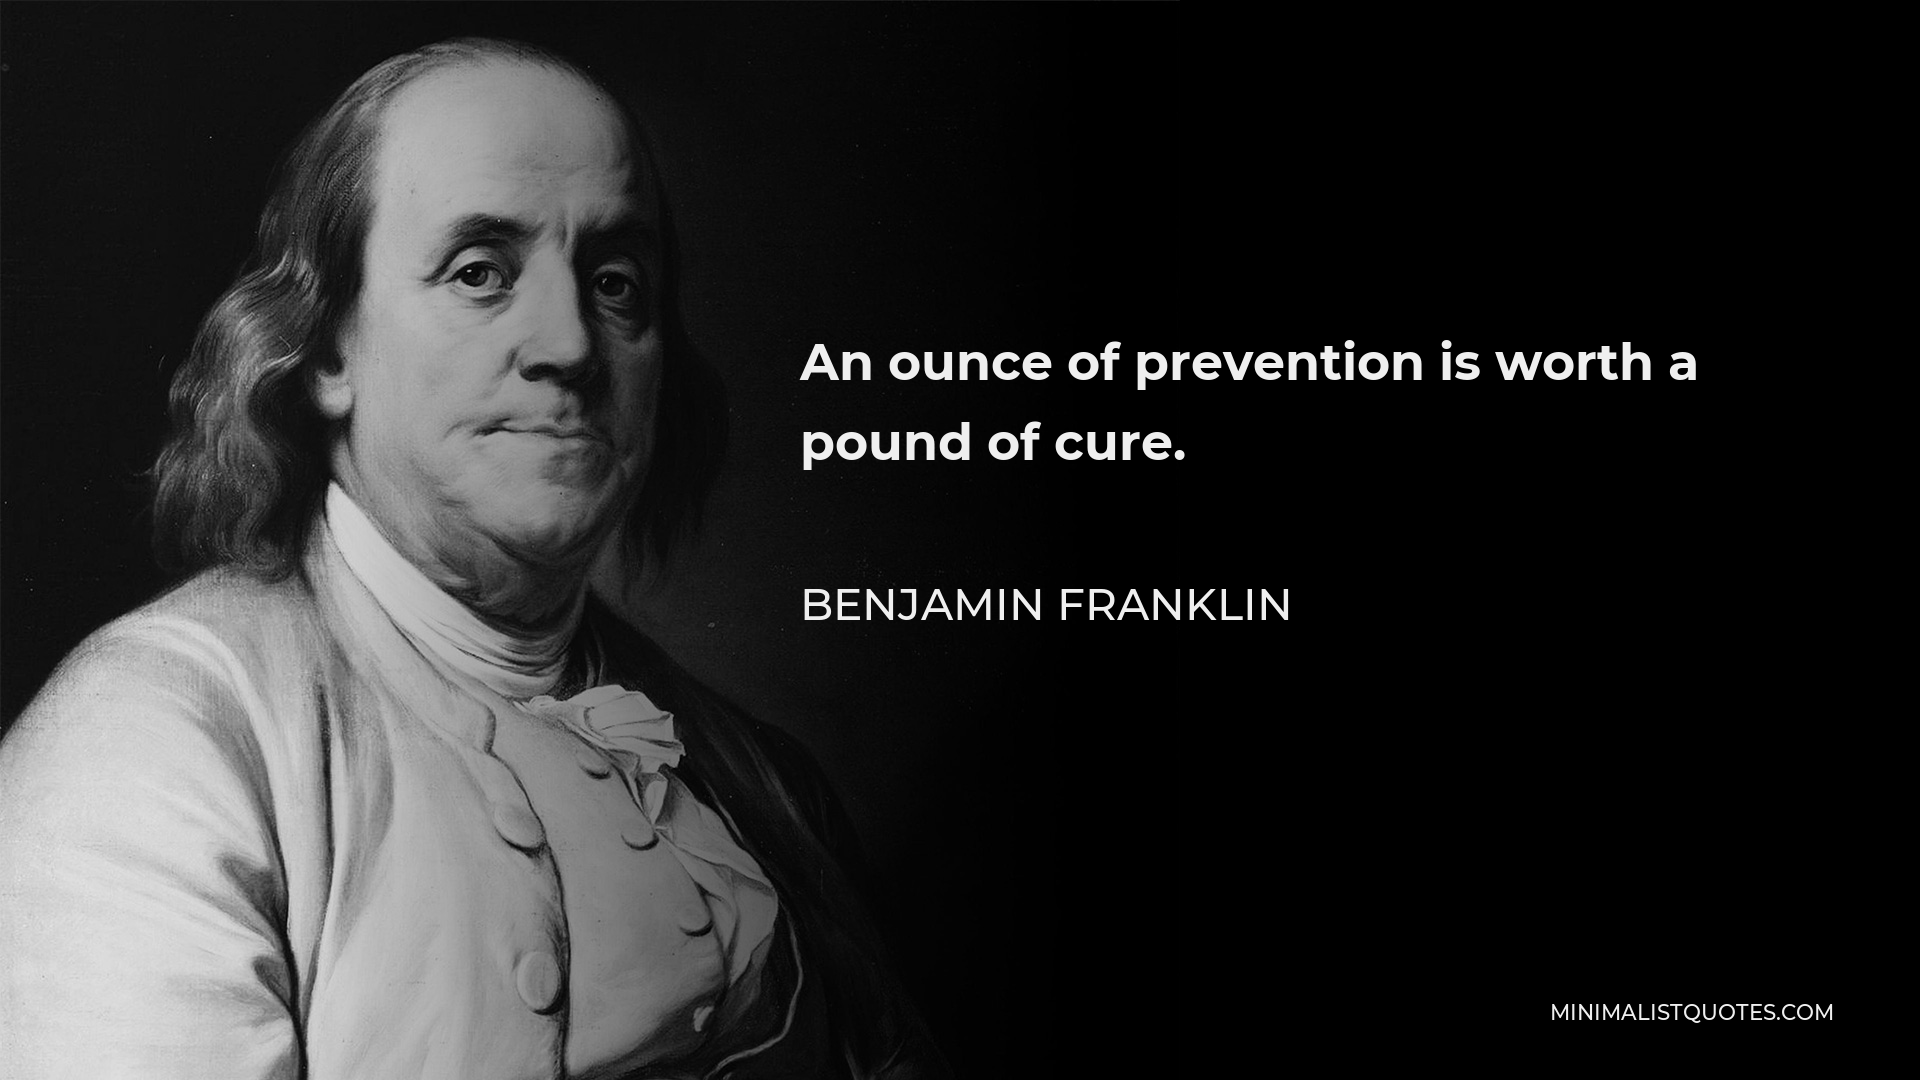 Benjamin Franklin Quote - An ounce of prevention is worth a pound of cure.